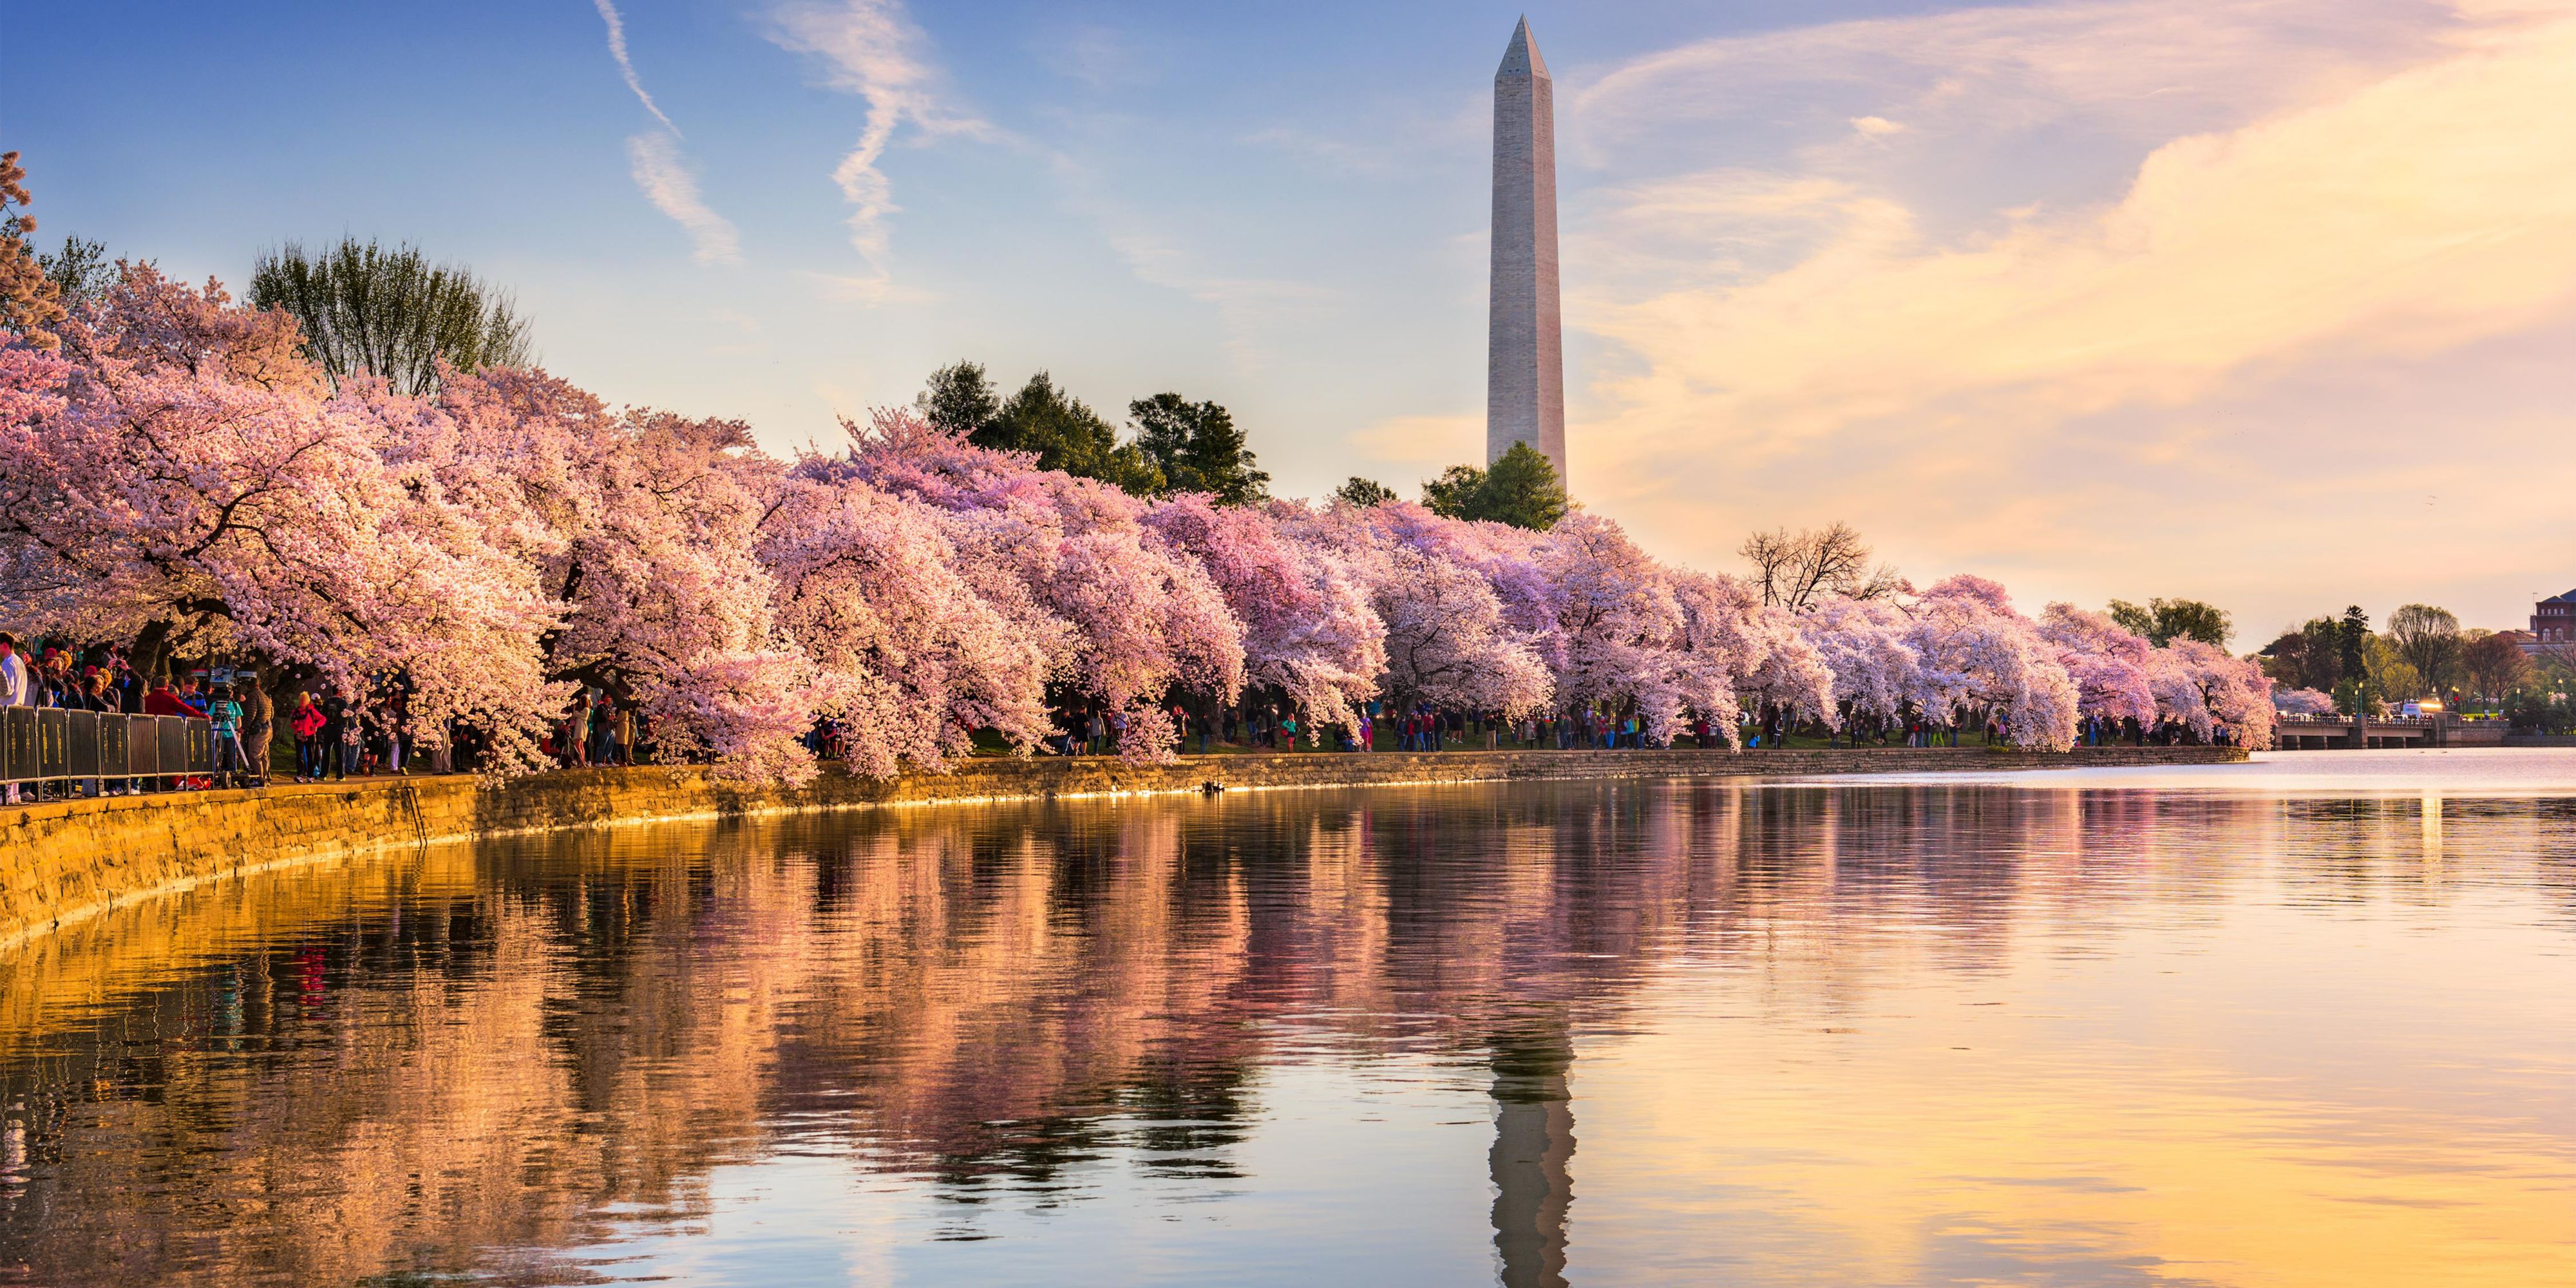 Our hotel is a hub for all the things to do in Washington, DC. It's a playground out here for history buffs, food lovers, art aficionados, concert-goers, and naturalists alike. Go for a walk and see what you find. A new adventure is around the corner.